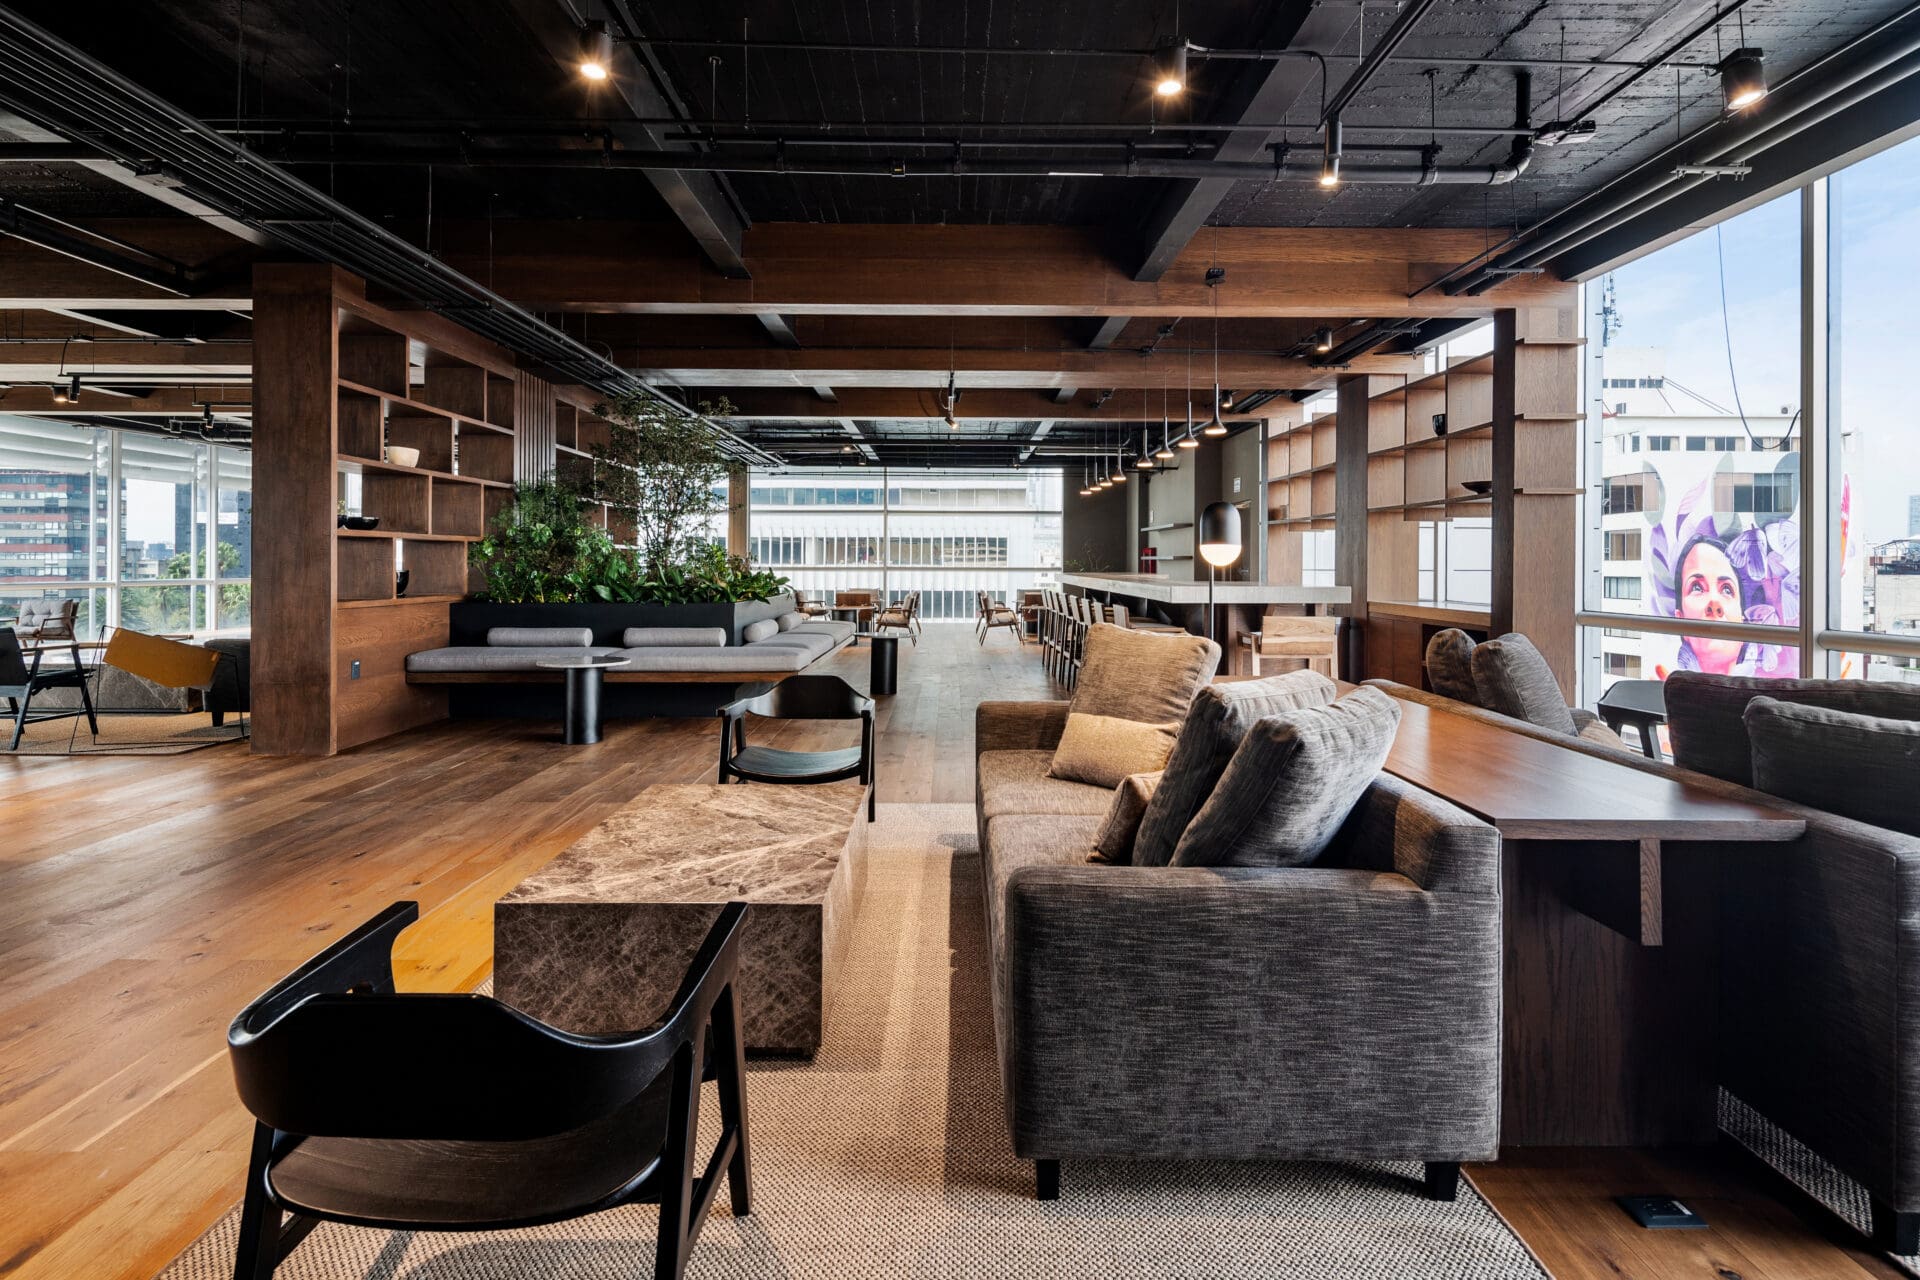 The best places to co-work in Mexico City | sleek sofas and chairs in a spacious open-plan room with wooden floors and floor-to-ceiling windows